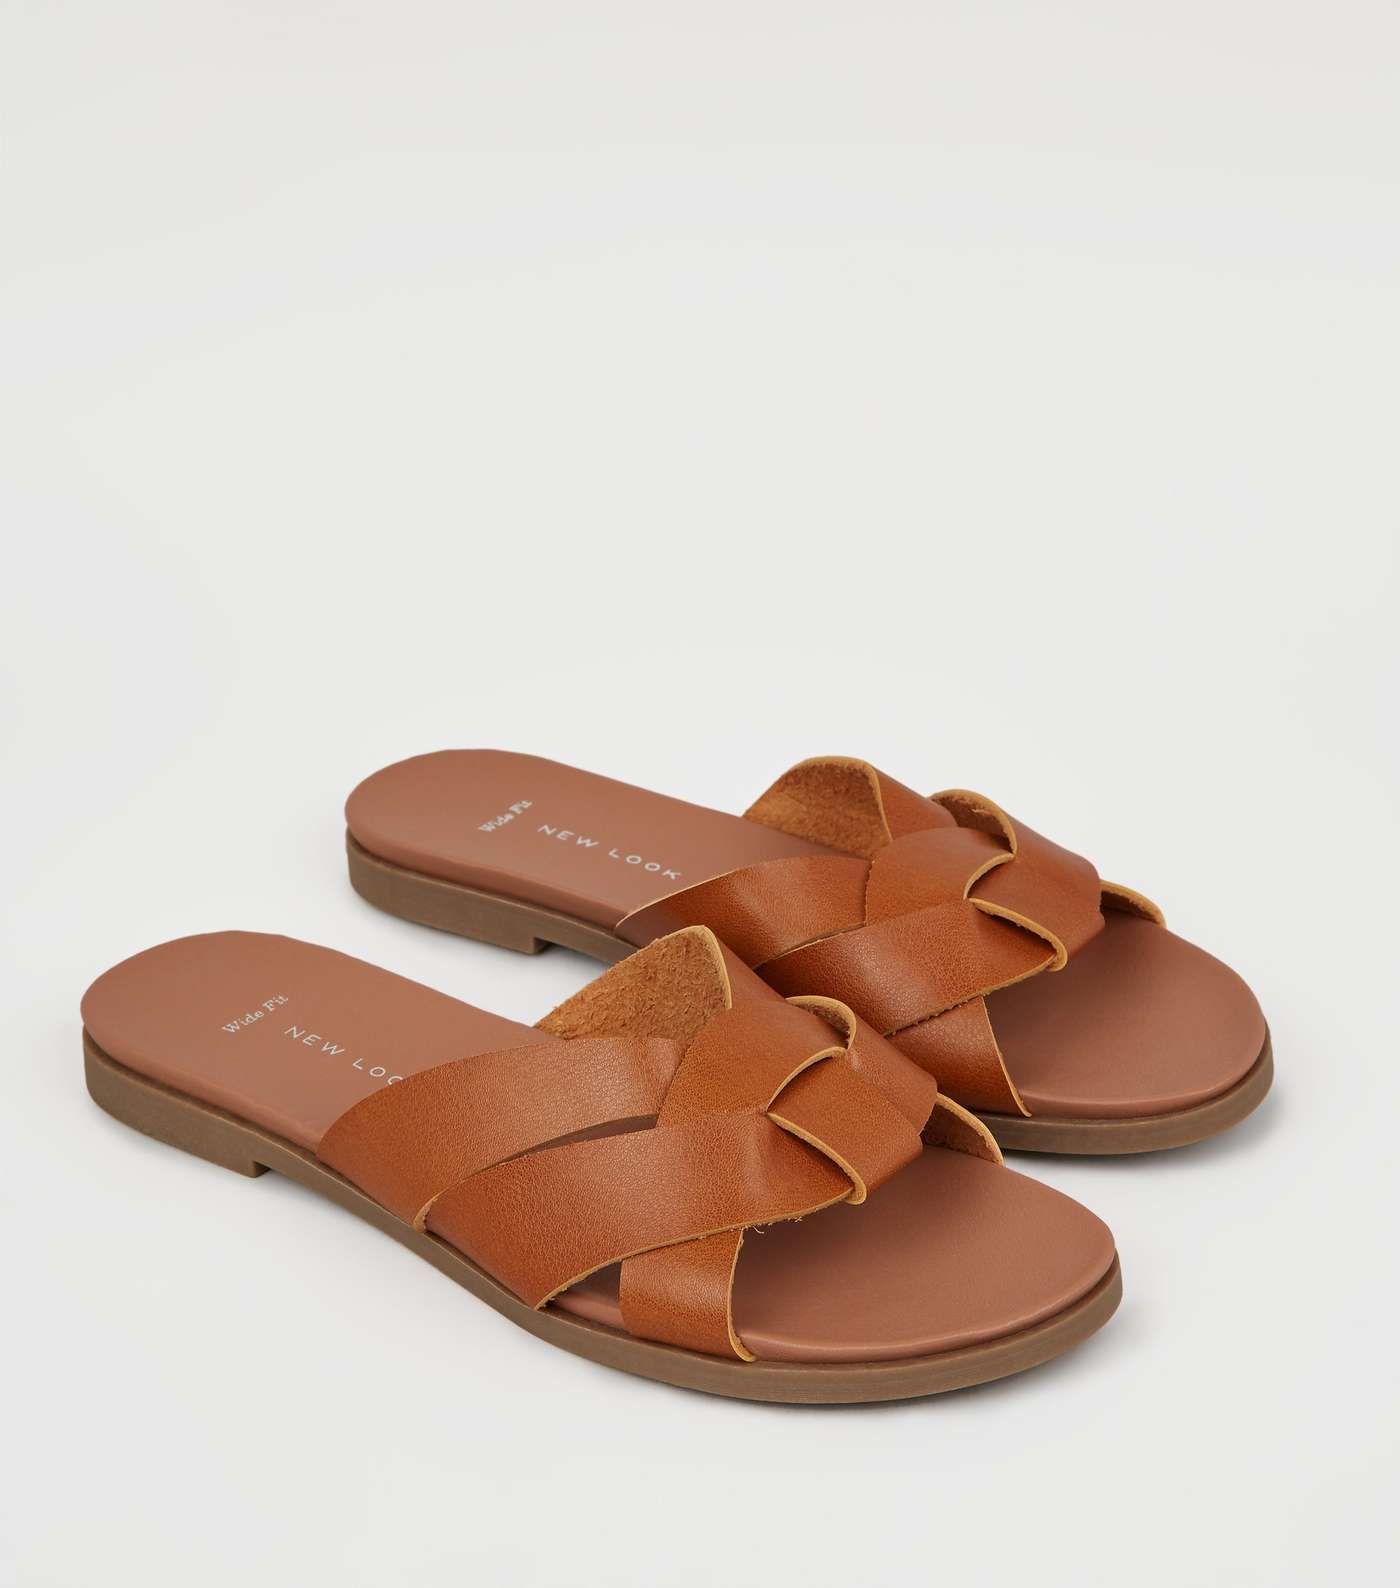 Wide Fit Tan Leather-Look Footbed Sliders  Image 3